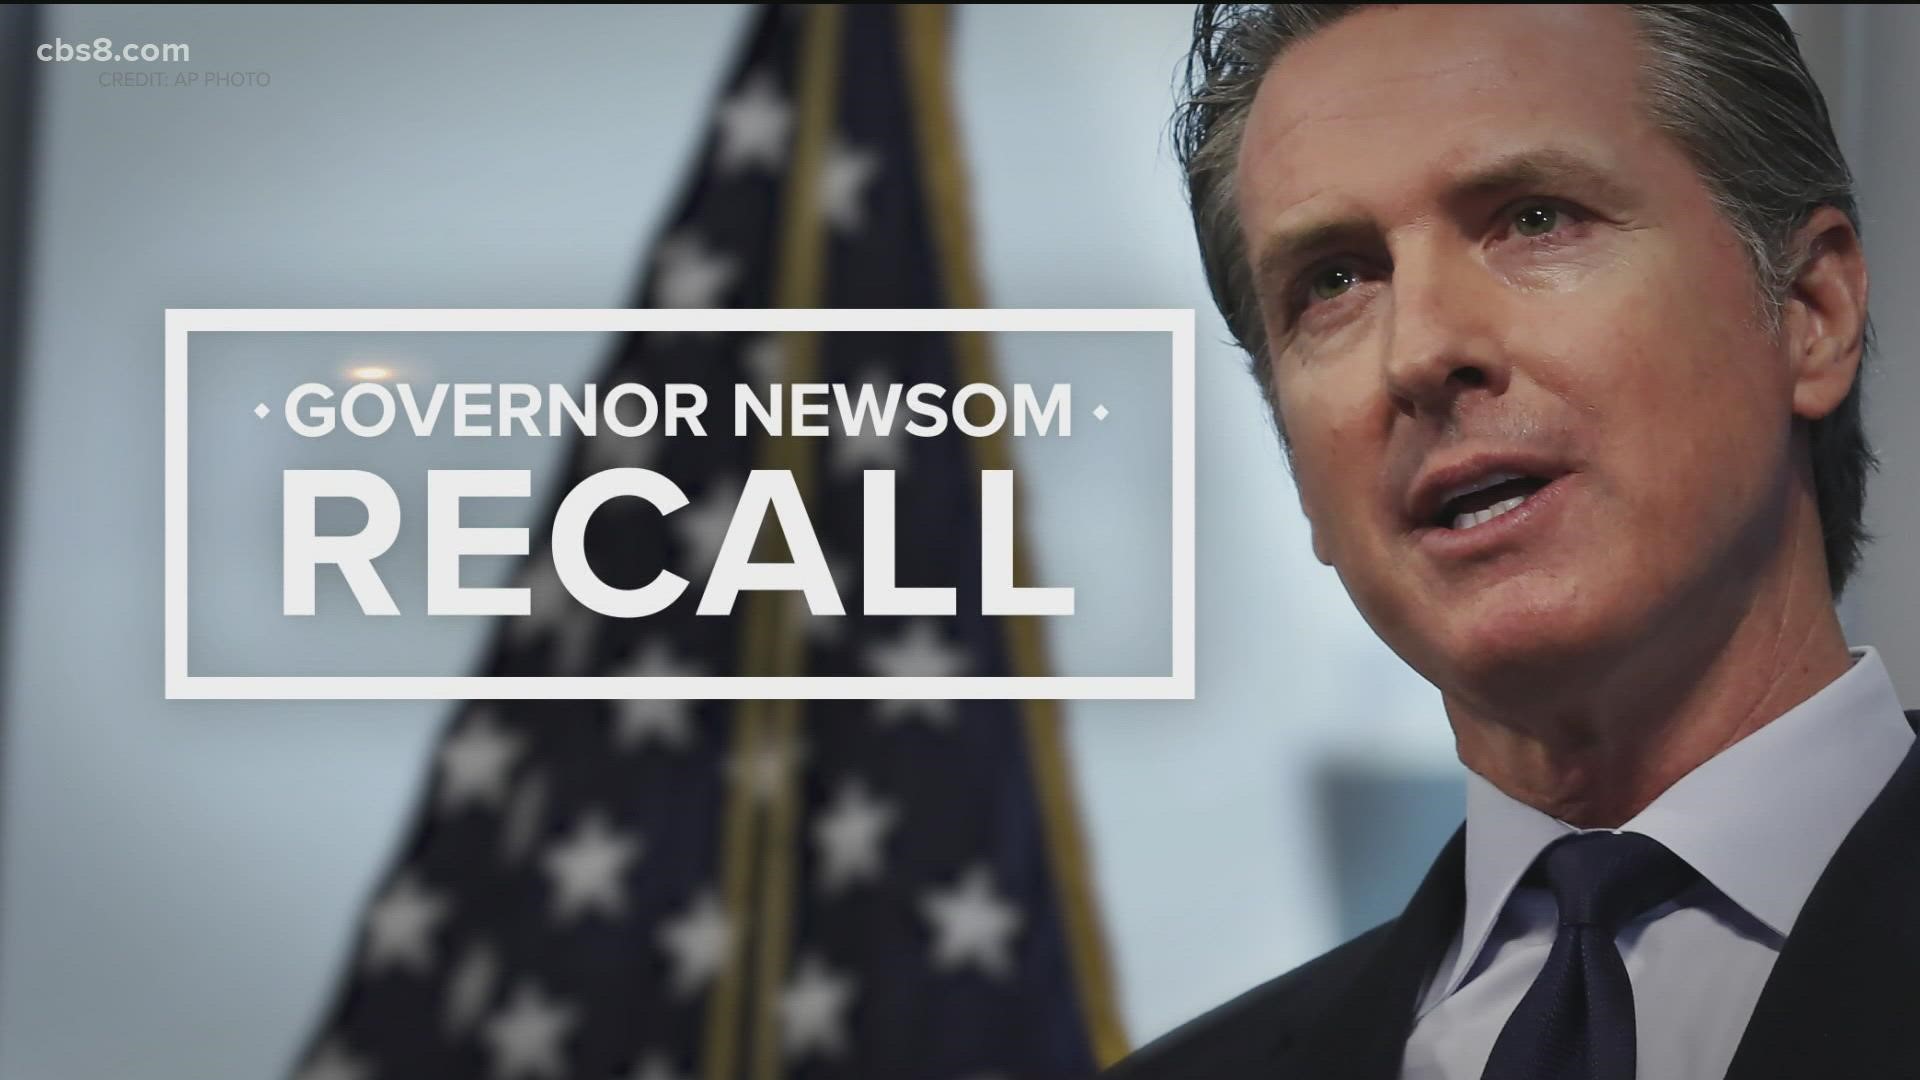 Just after 8:45 p.m., the Associated Press called the race saying voters rejected the effort to remove Governor Gavin Newsom